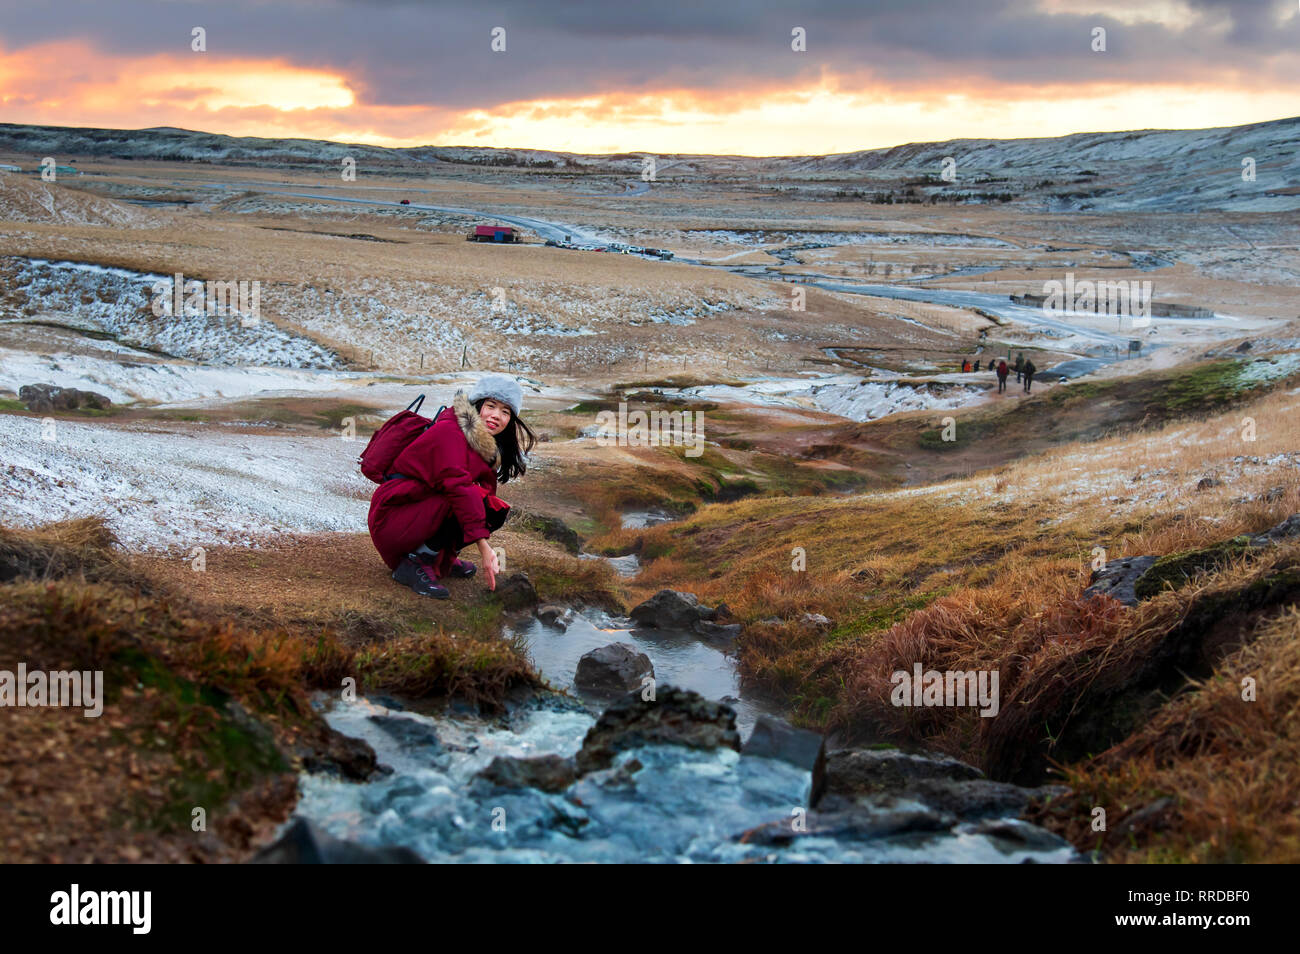 Female traveler by a thermal river in Reykjadalur, Iceland Stock Photo